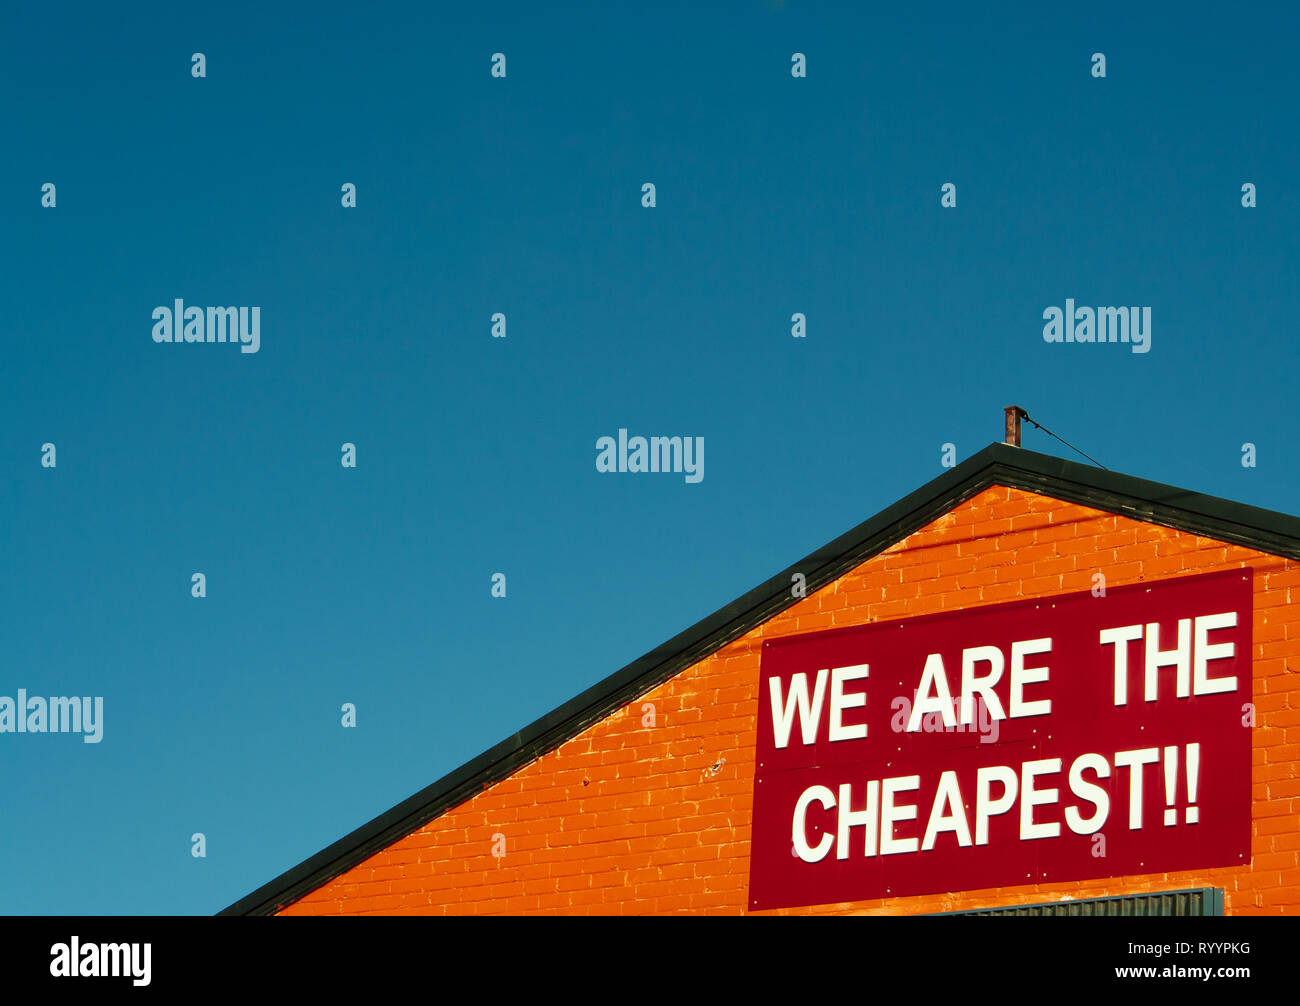 Discount prices sign on an orange warehouse against a clear sky Stock Photo